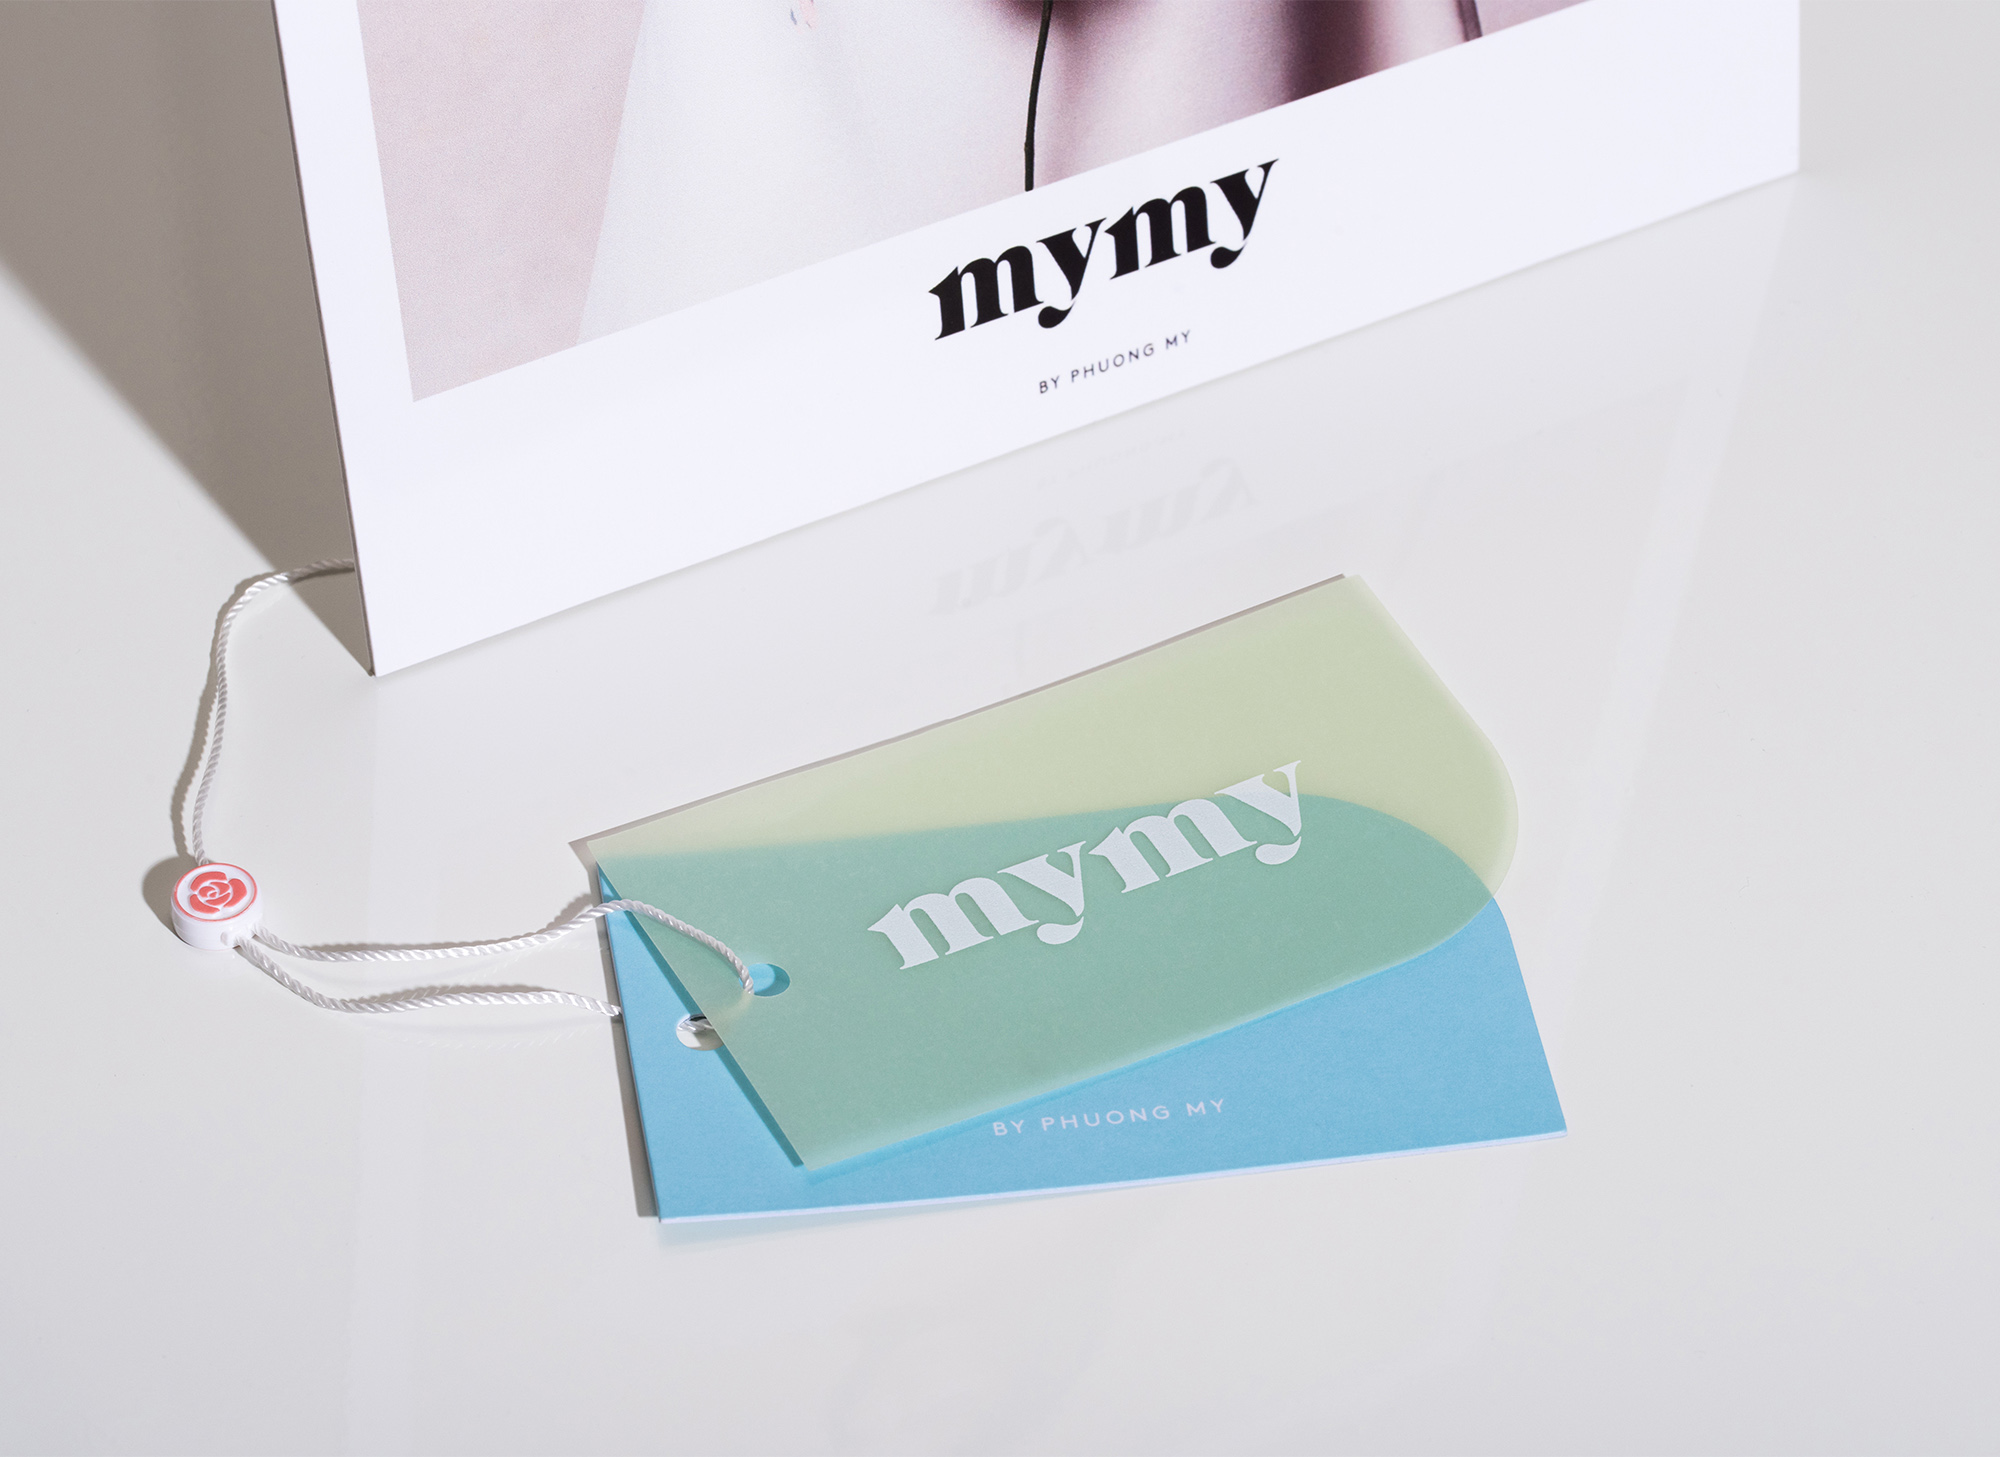 MYMY logo on swing tags for products